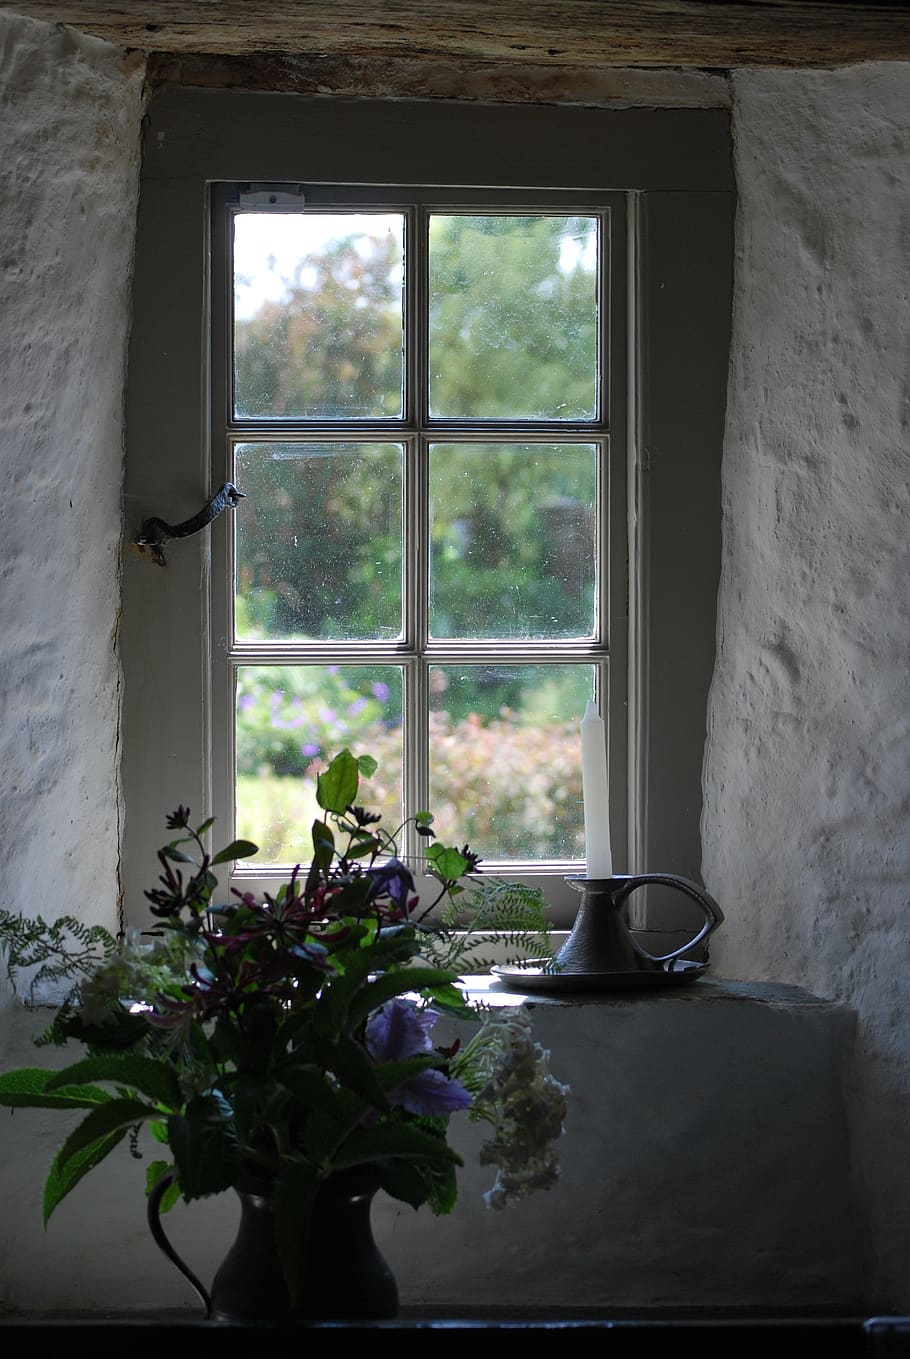 window, old house, stone-built house, plant, indoors, day, glass - material, flowering plant, flower, nature